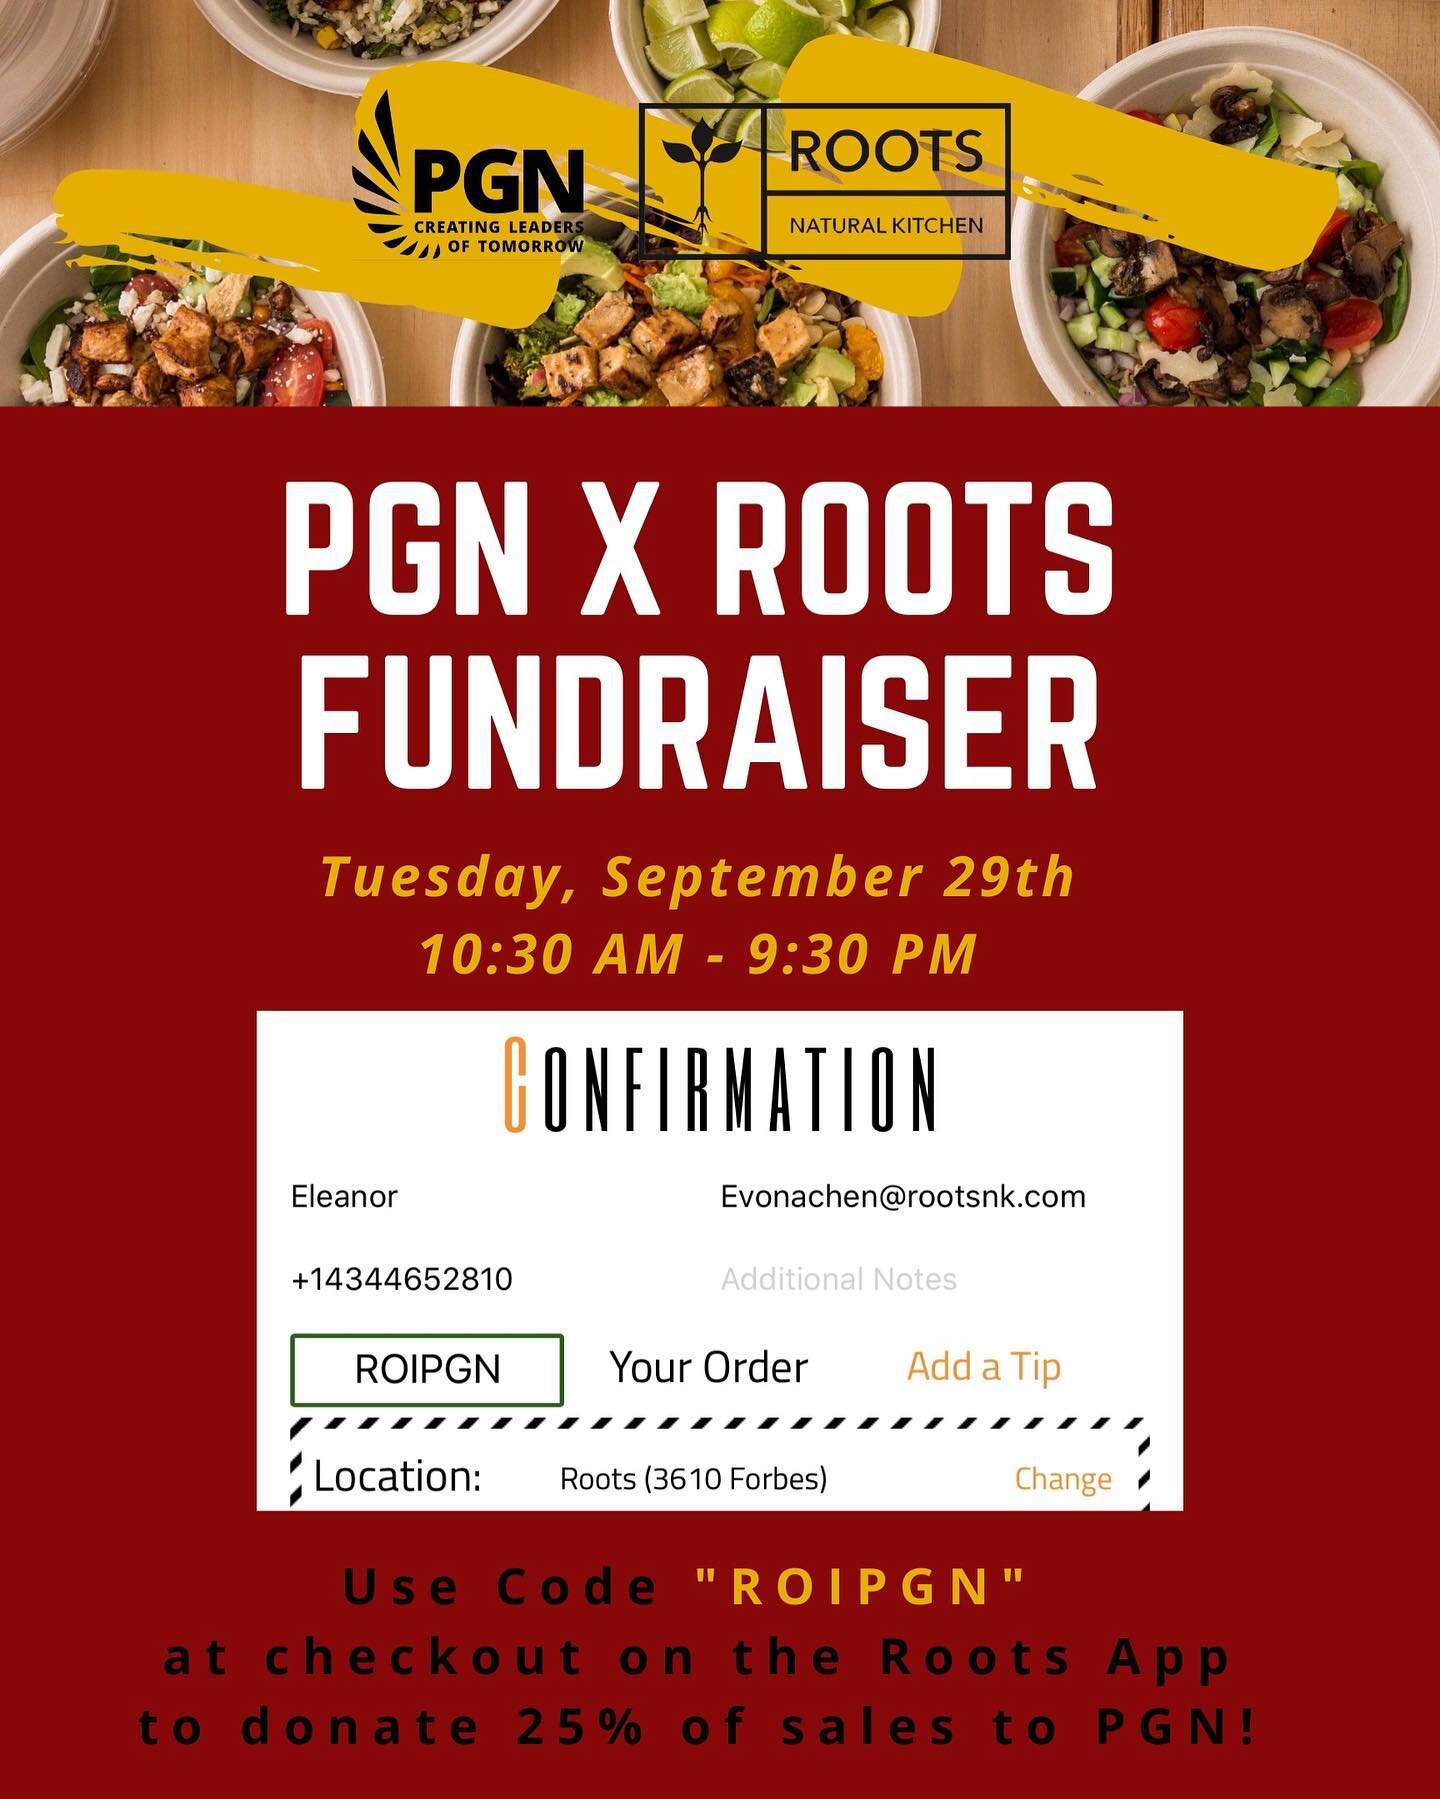 Support our Pitt chapter TODAY by participating in our Roots fundraiser 🍴🥗 Order through the Roots app and make sure to type in &ldquo;ROIPGN&rdquo; at the checkout to donate a portion of proceeds to PGN!!! 

Comment down below what you&rsquo;re ge